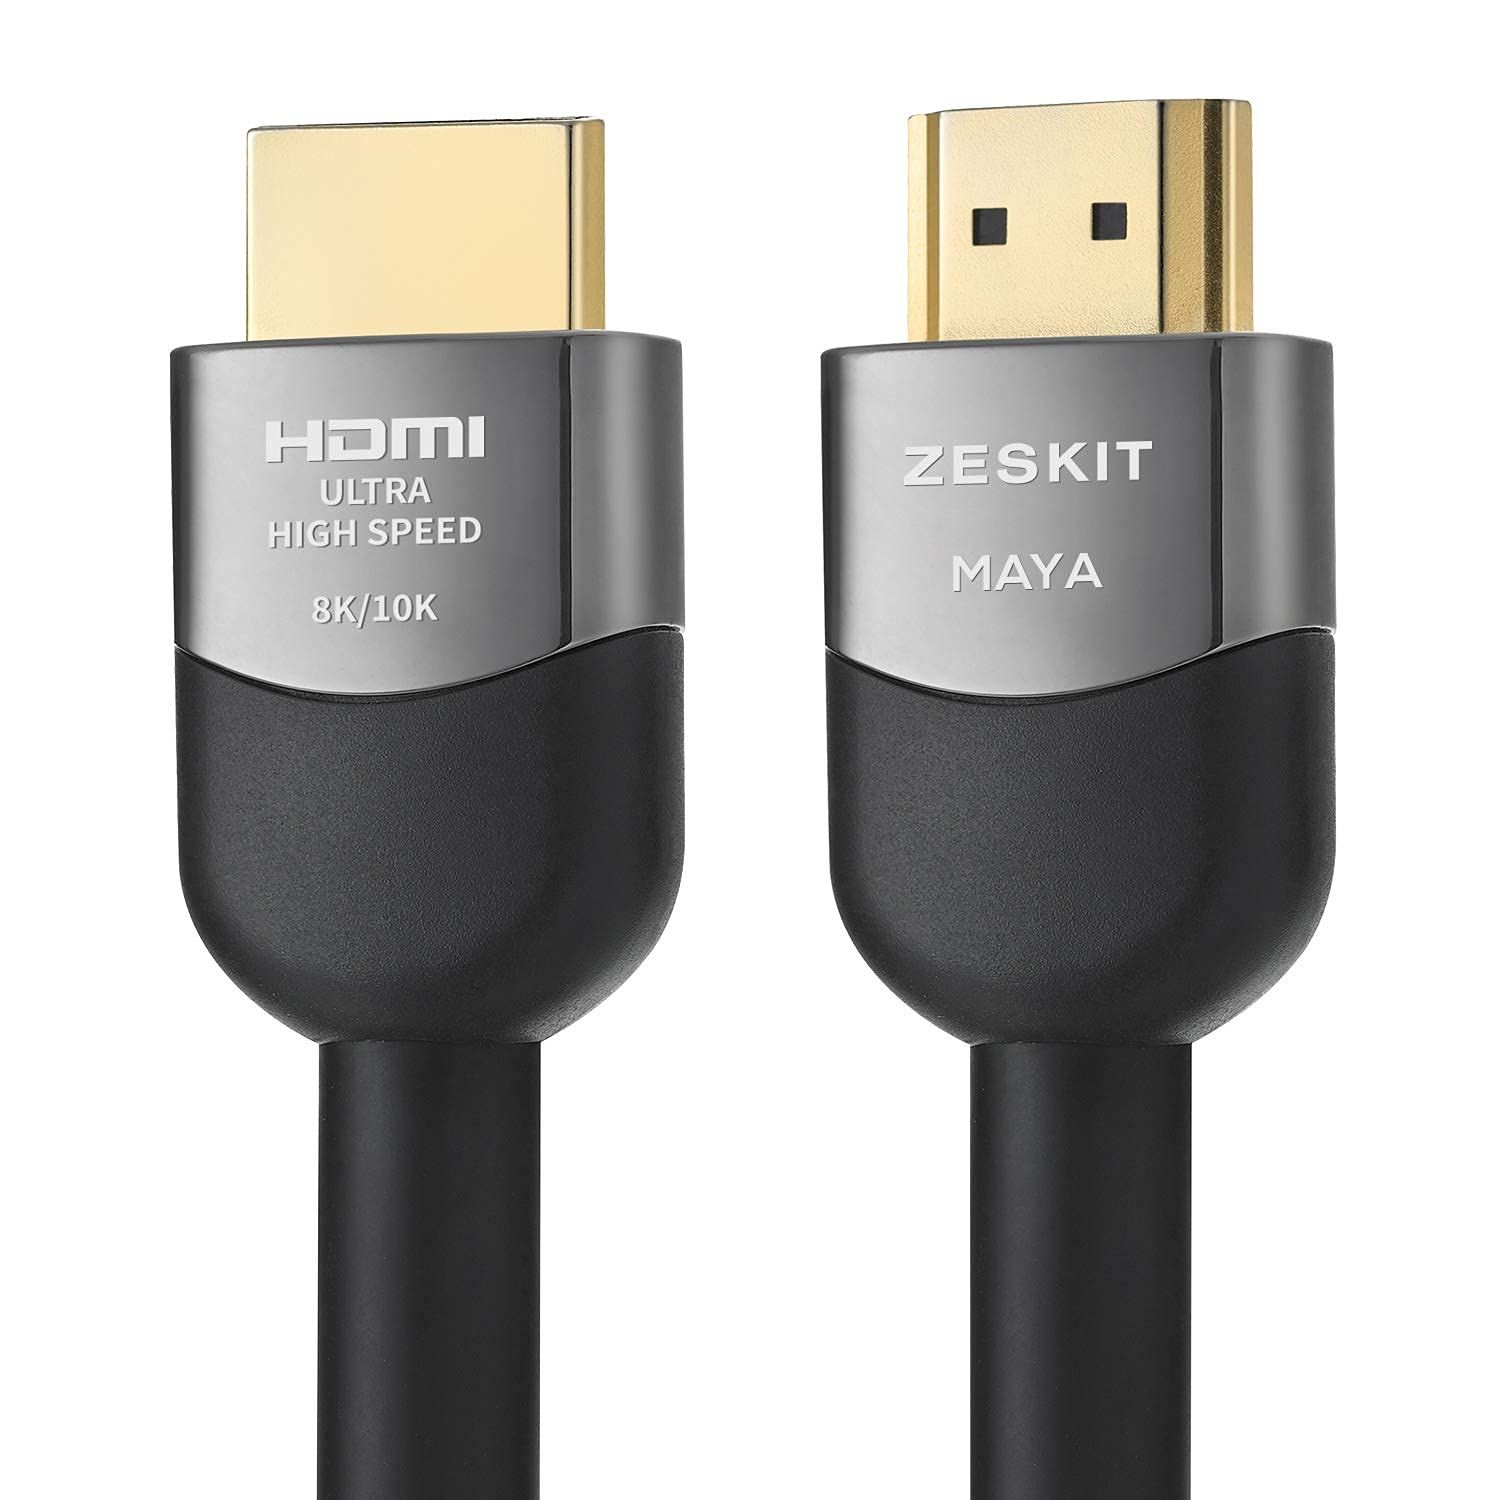 Zeskit MAYA Ultra High Speed HDMI Cable for In wall